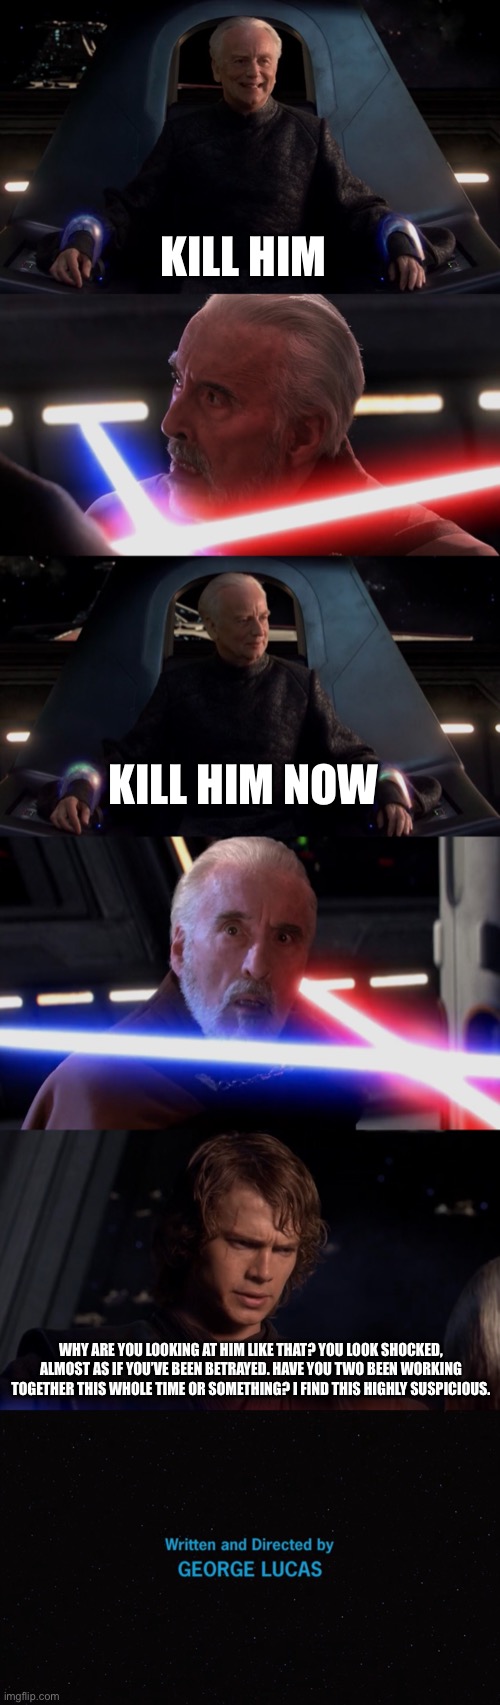  KILL HIM; KILL HIM NOW; WHY ARE YOU LOOKING AT HIM LIKE THAT? YOU LOOK SHOCKED, ALMOST AS IF YOU’VE BEEN BETRAYED. HAVE YOU TWO BEEN WORKING TOGETHER THIS WHOLE TIME OR SOMETHING? I FIND THIS HIGHLY SUSPICIOUS. | image tagged in star wars,anakin skywalker,do it,funny memes | made w/ Imgflip meme maker